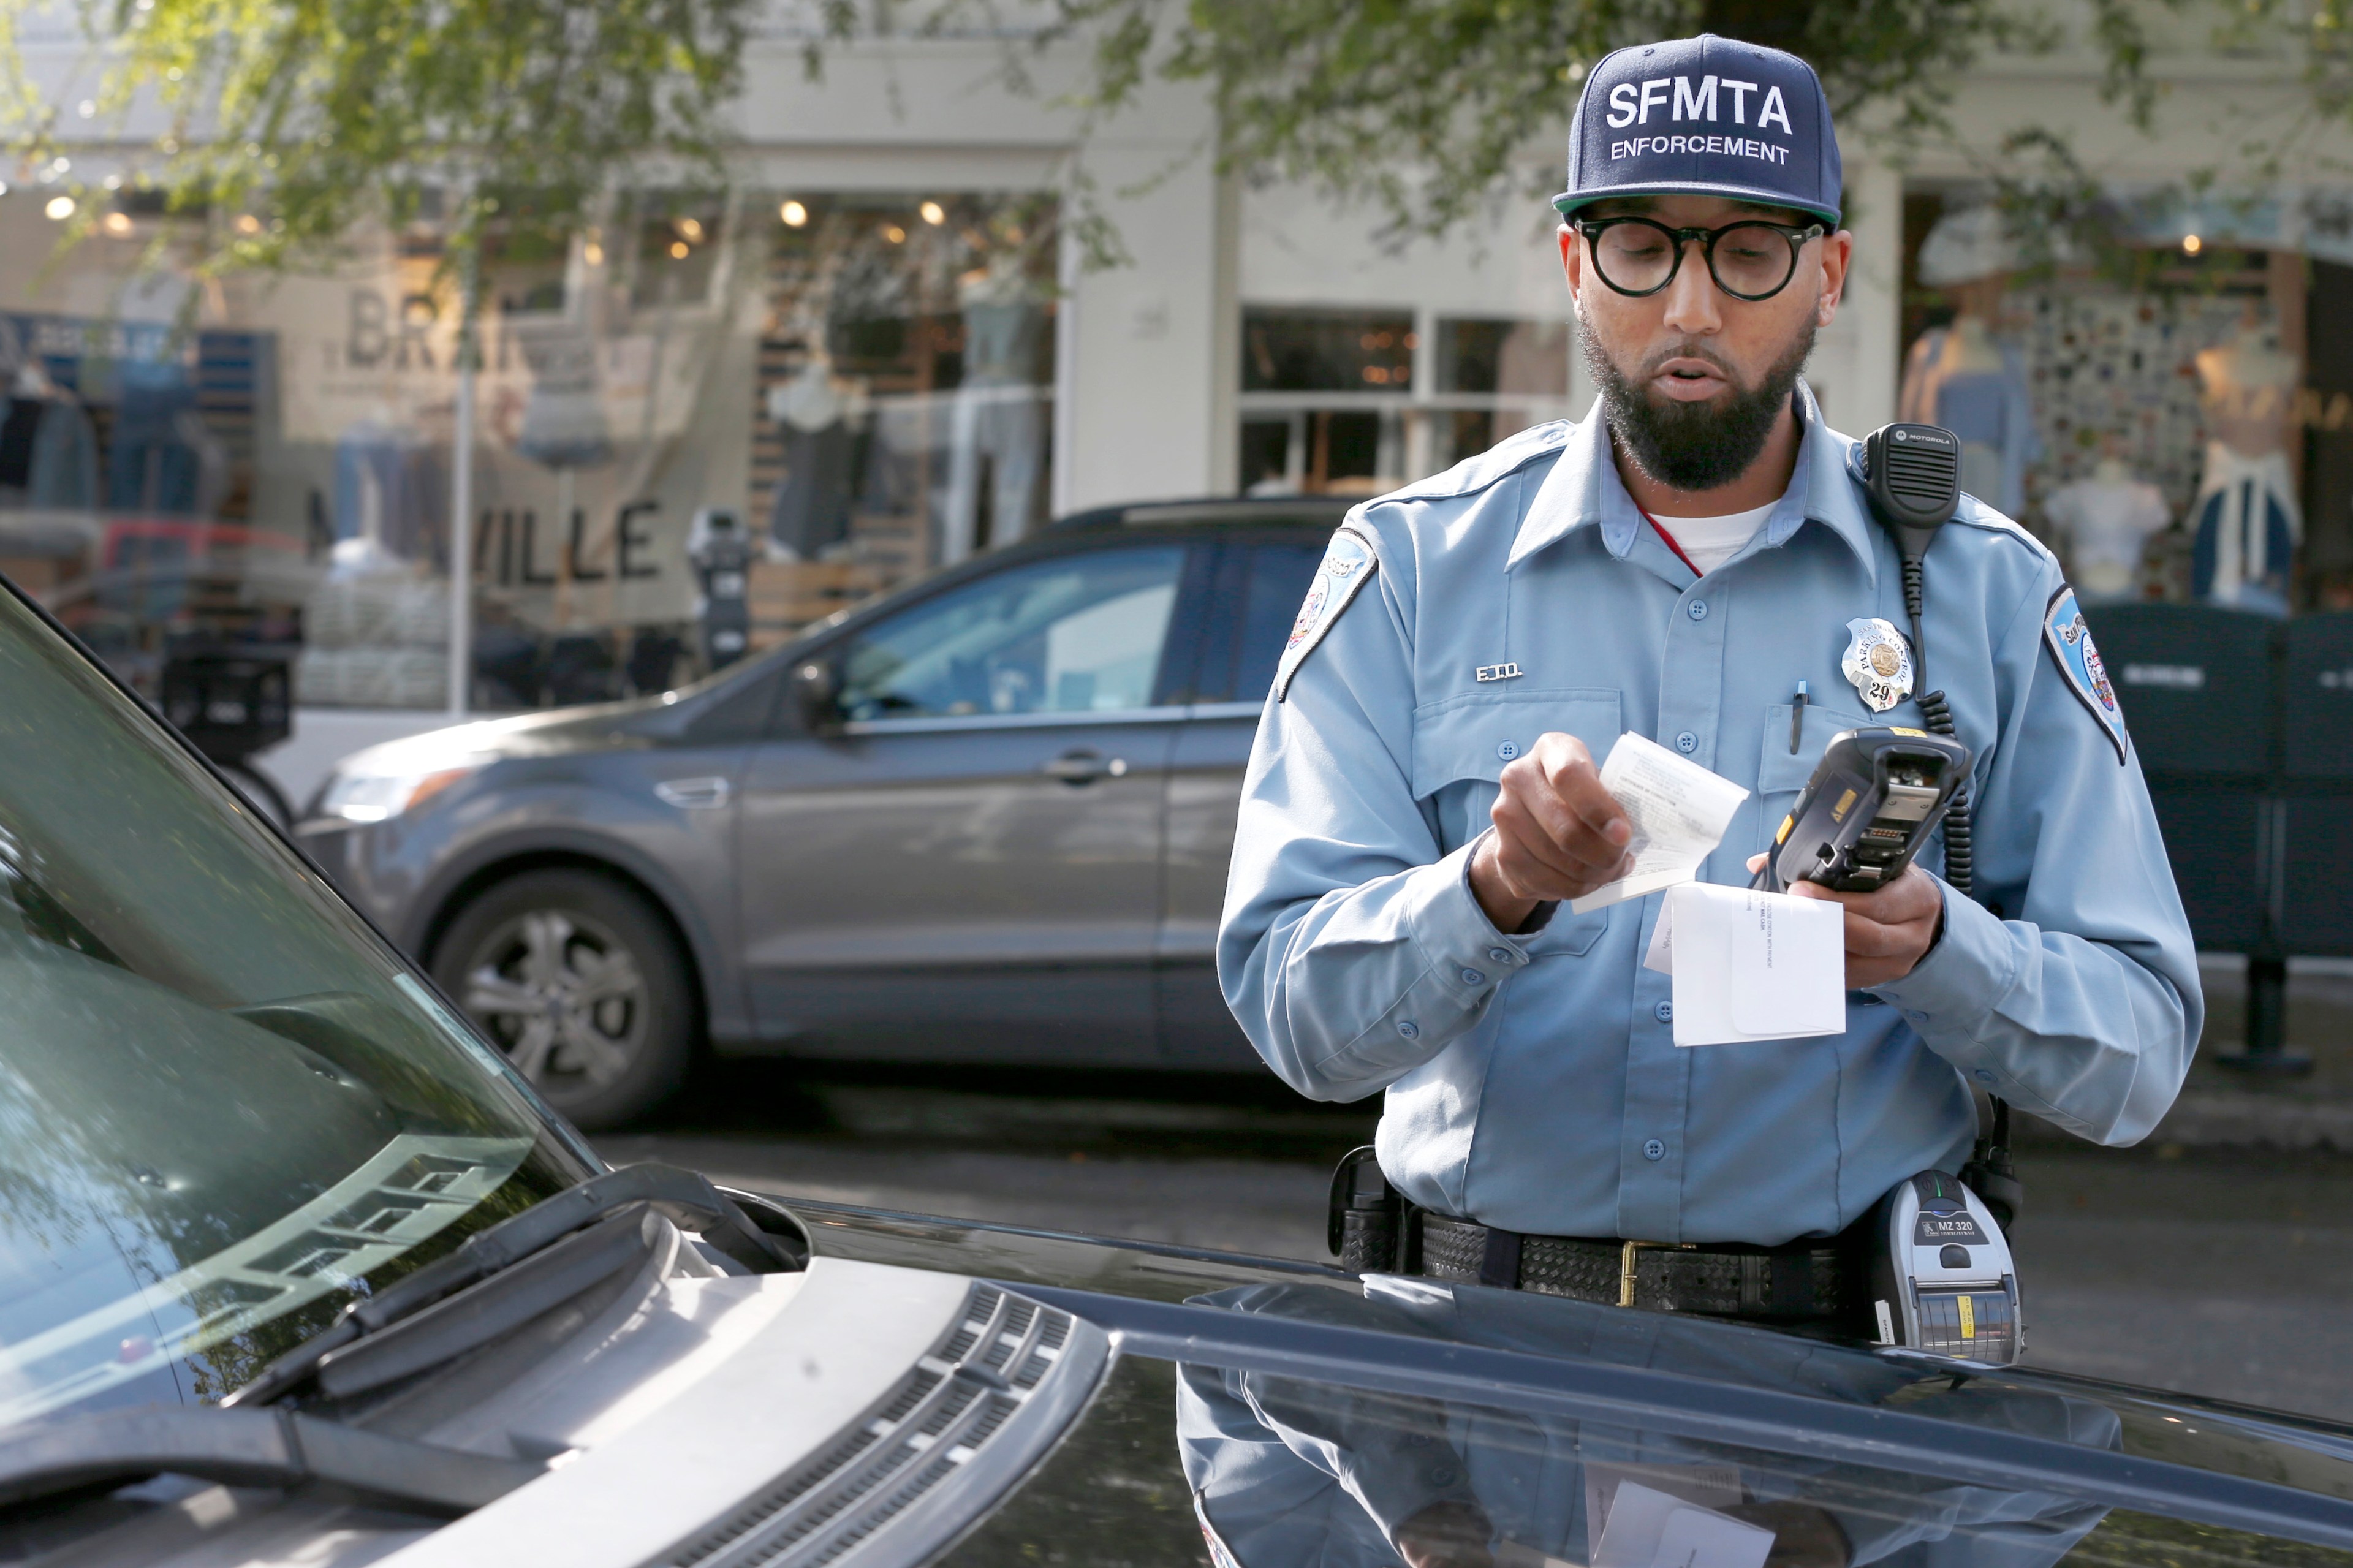 Parking officer in a blue uniform writes a ticket by a car, with a handheld device and paper.